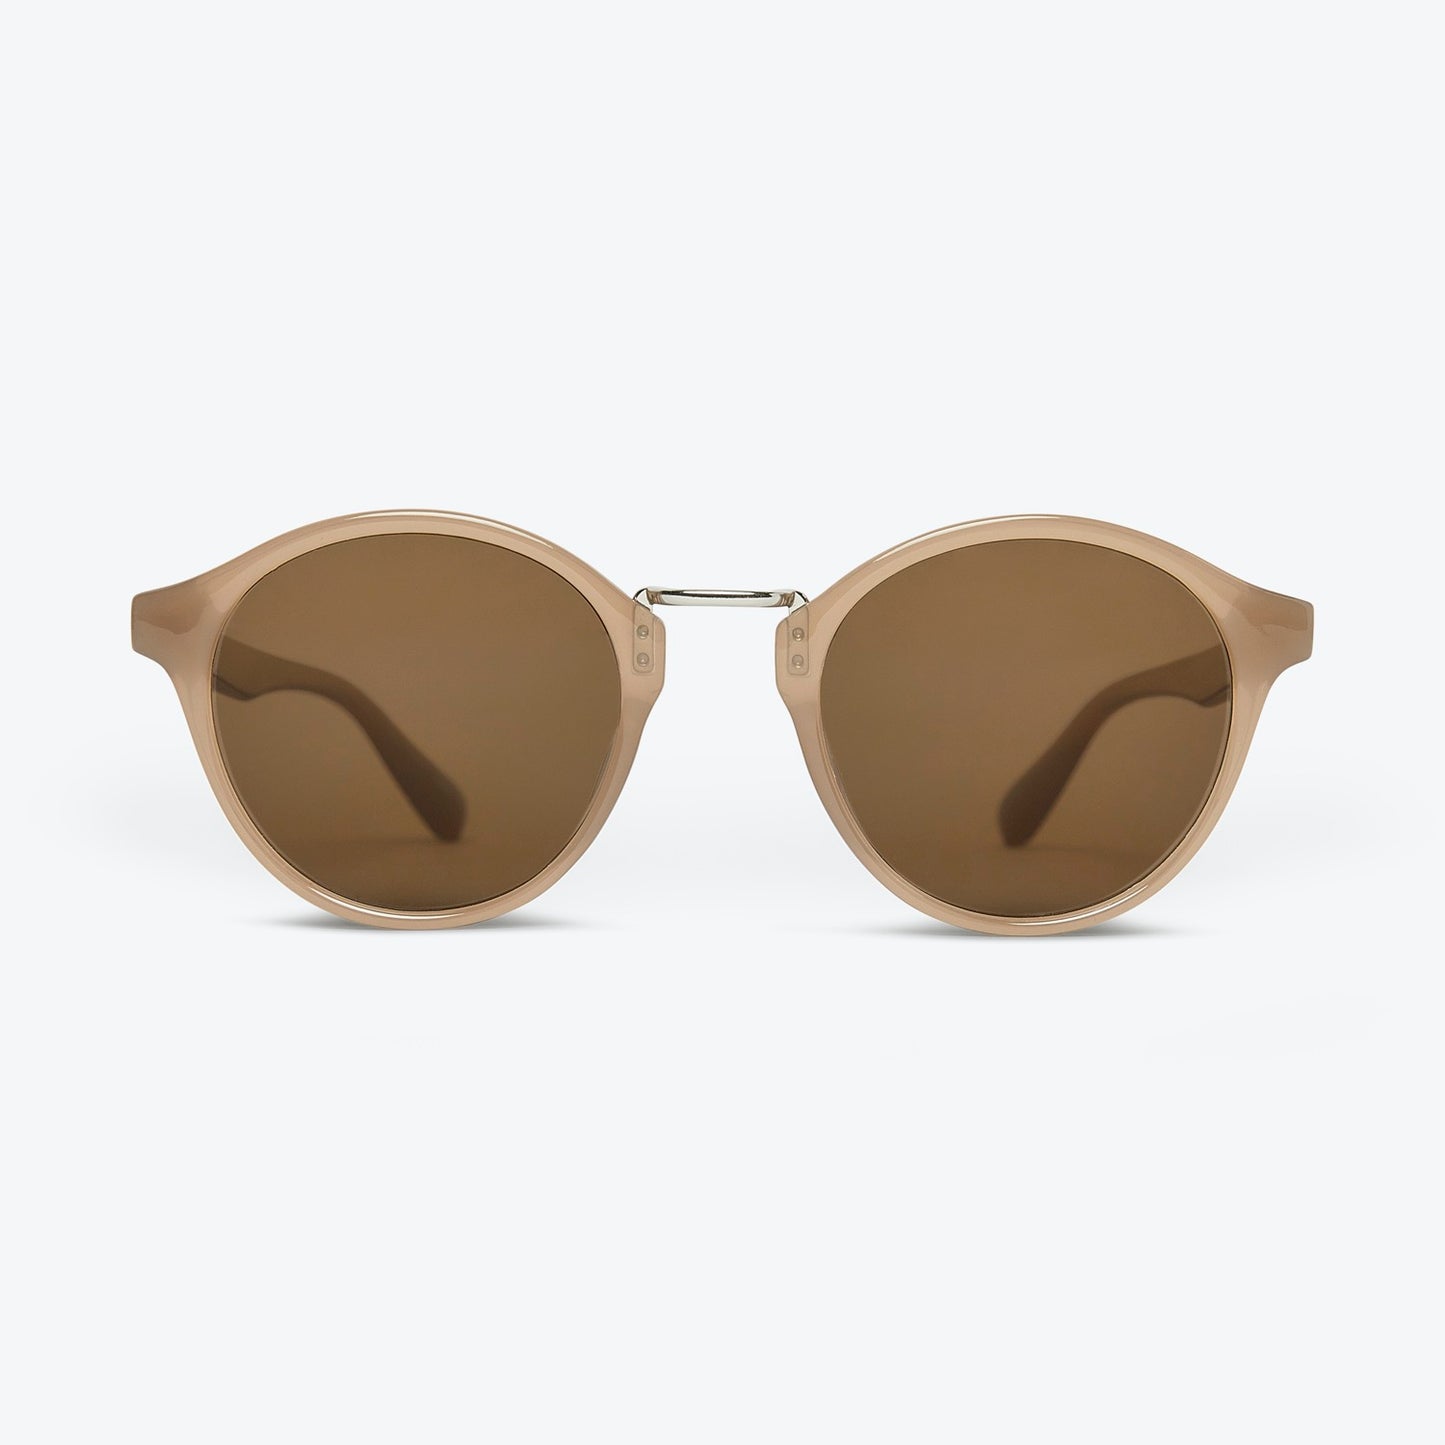 Local Supply - LAX - Sand Frame w/ Brown Lens